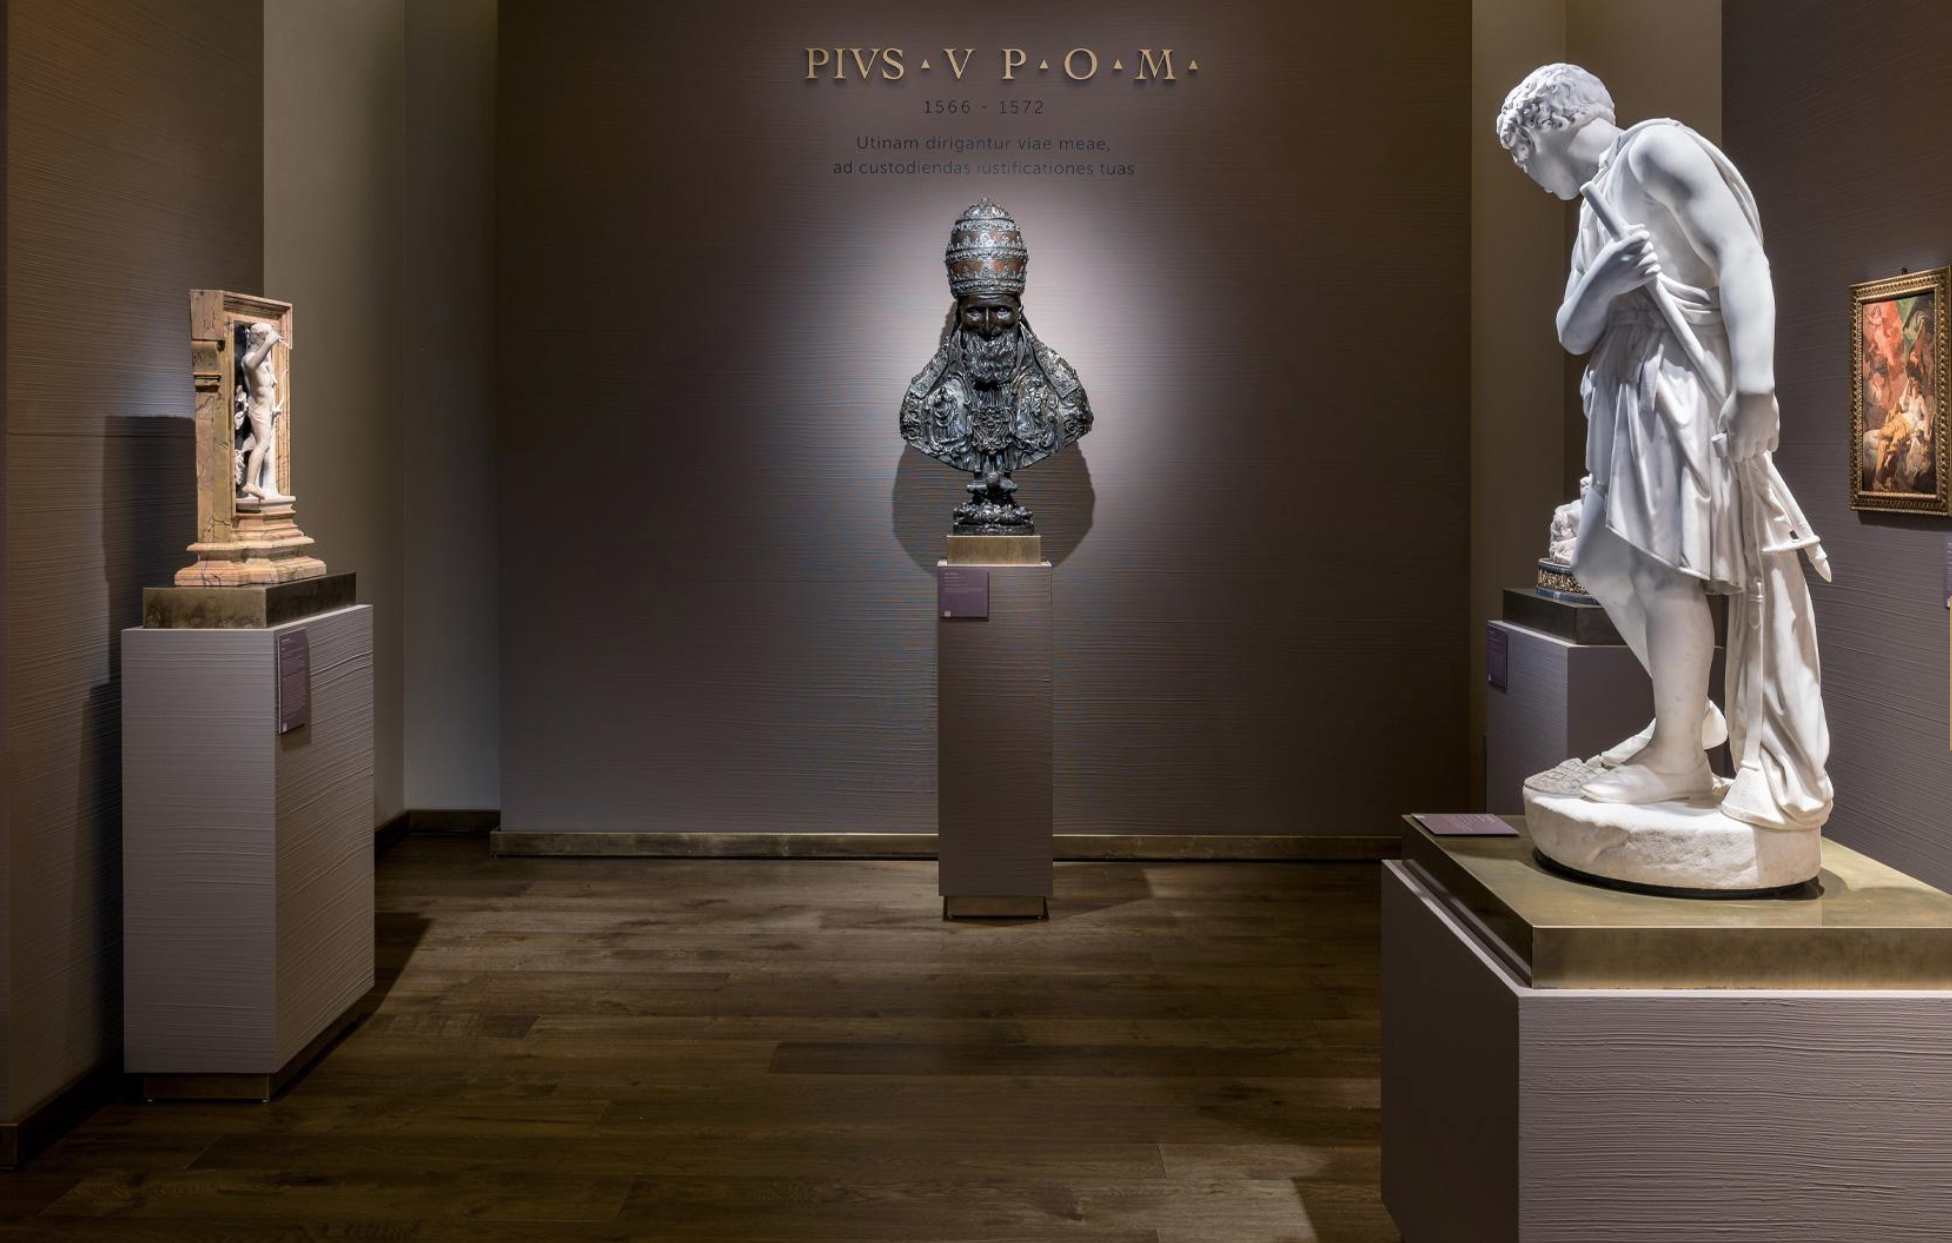 Walter Padovani Fine Art from Renaissance to the 19th century, a, Tefaf 2022